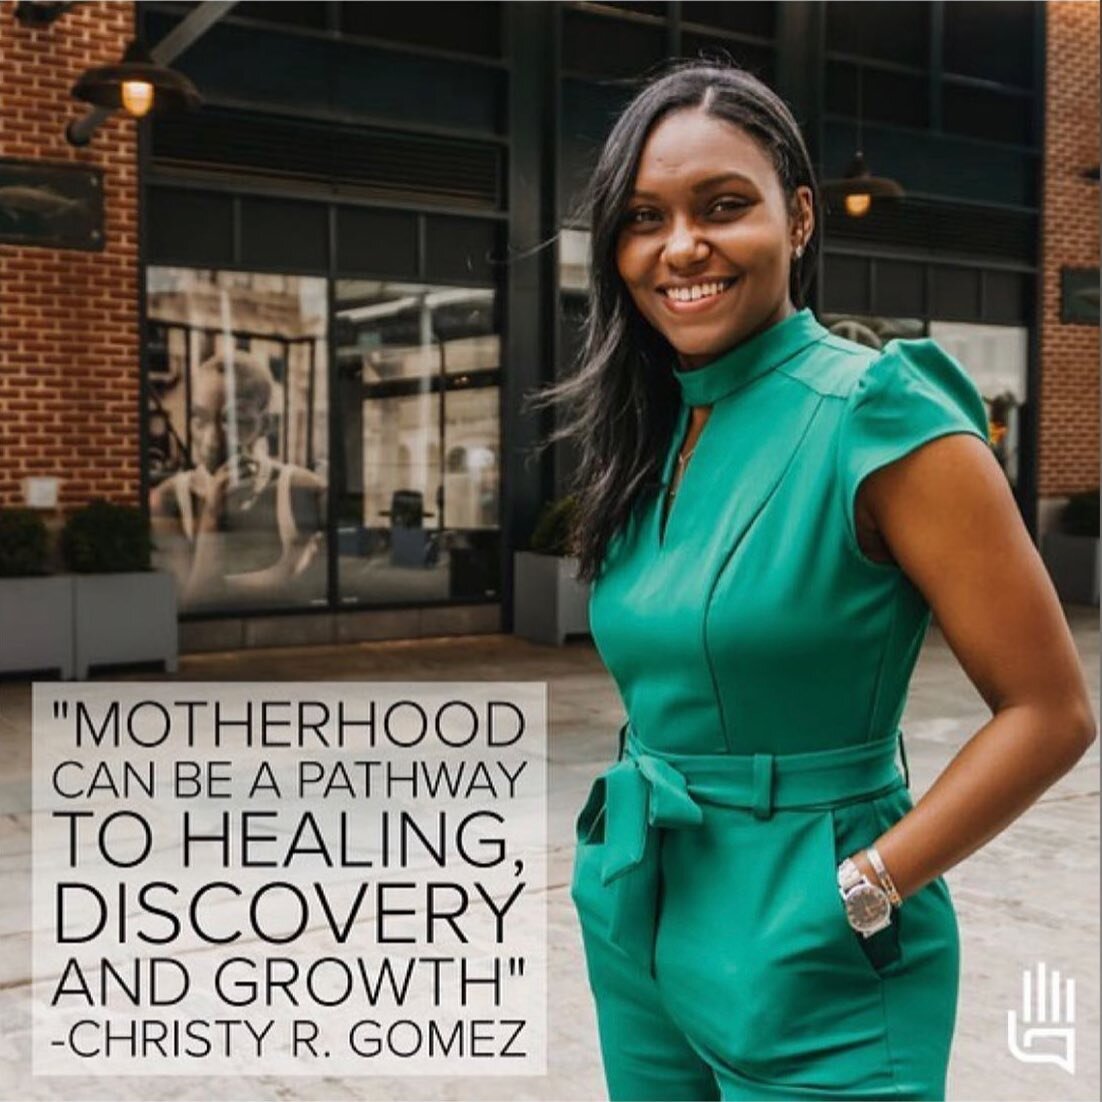 New Site Launch!!

&ldquo;Motherhood can be a pathway to healing, discovery and growth.&rdquo; 

I wholeheartedly truly believe this and it has been a blessing to be in a position to help new and expectant mothers and parents begin the journey of hea